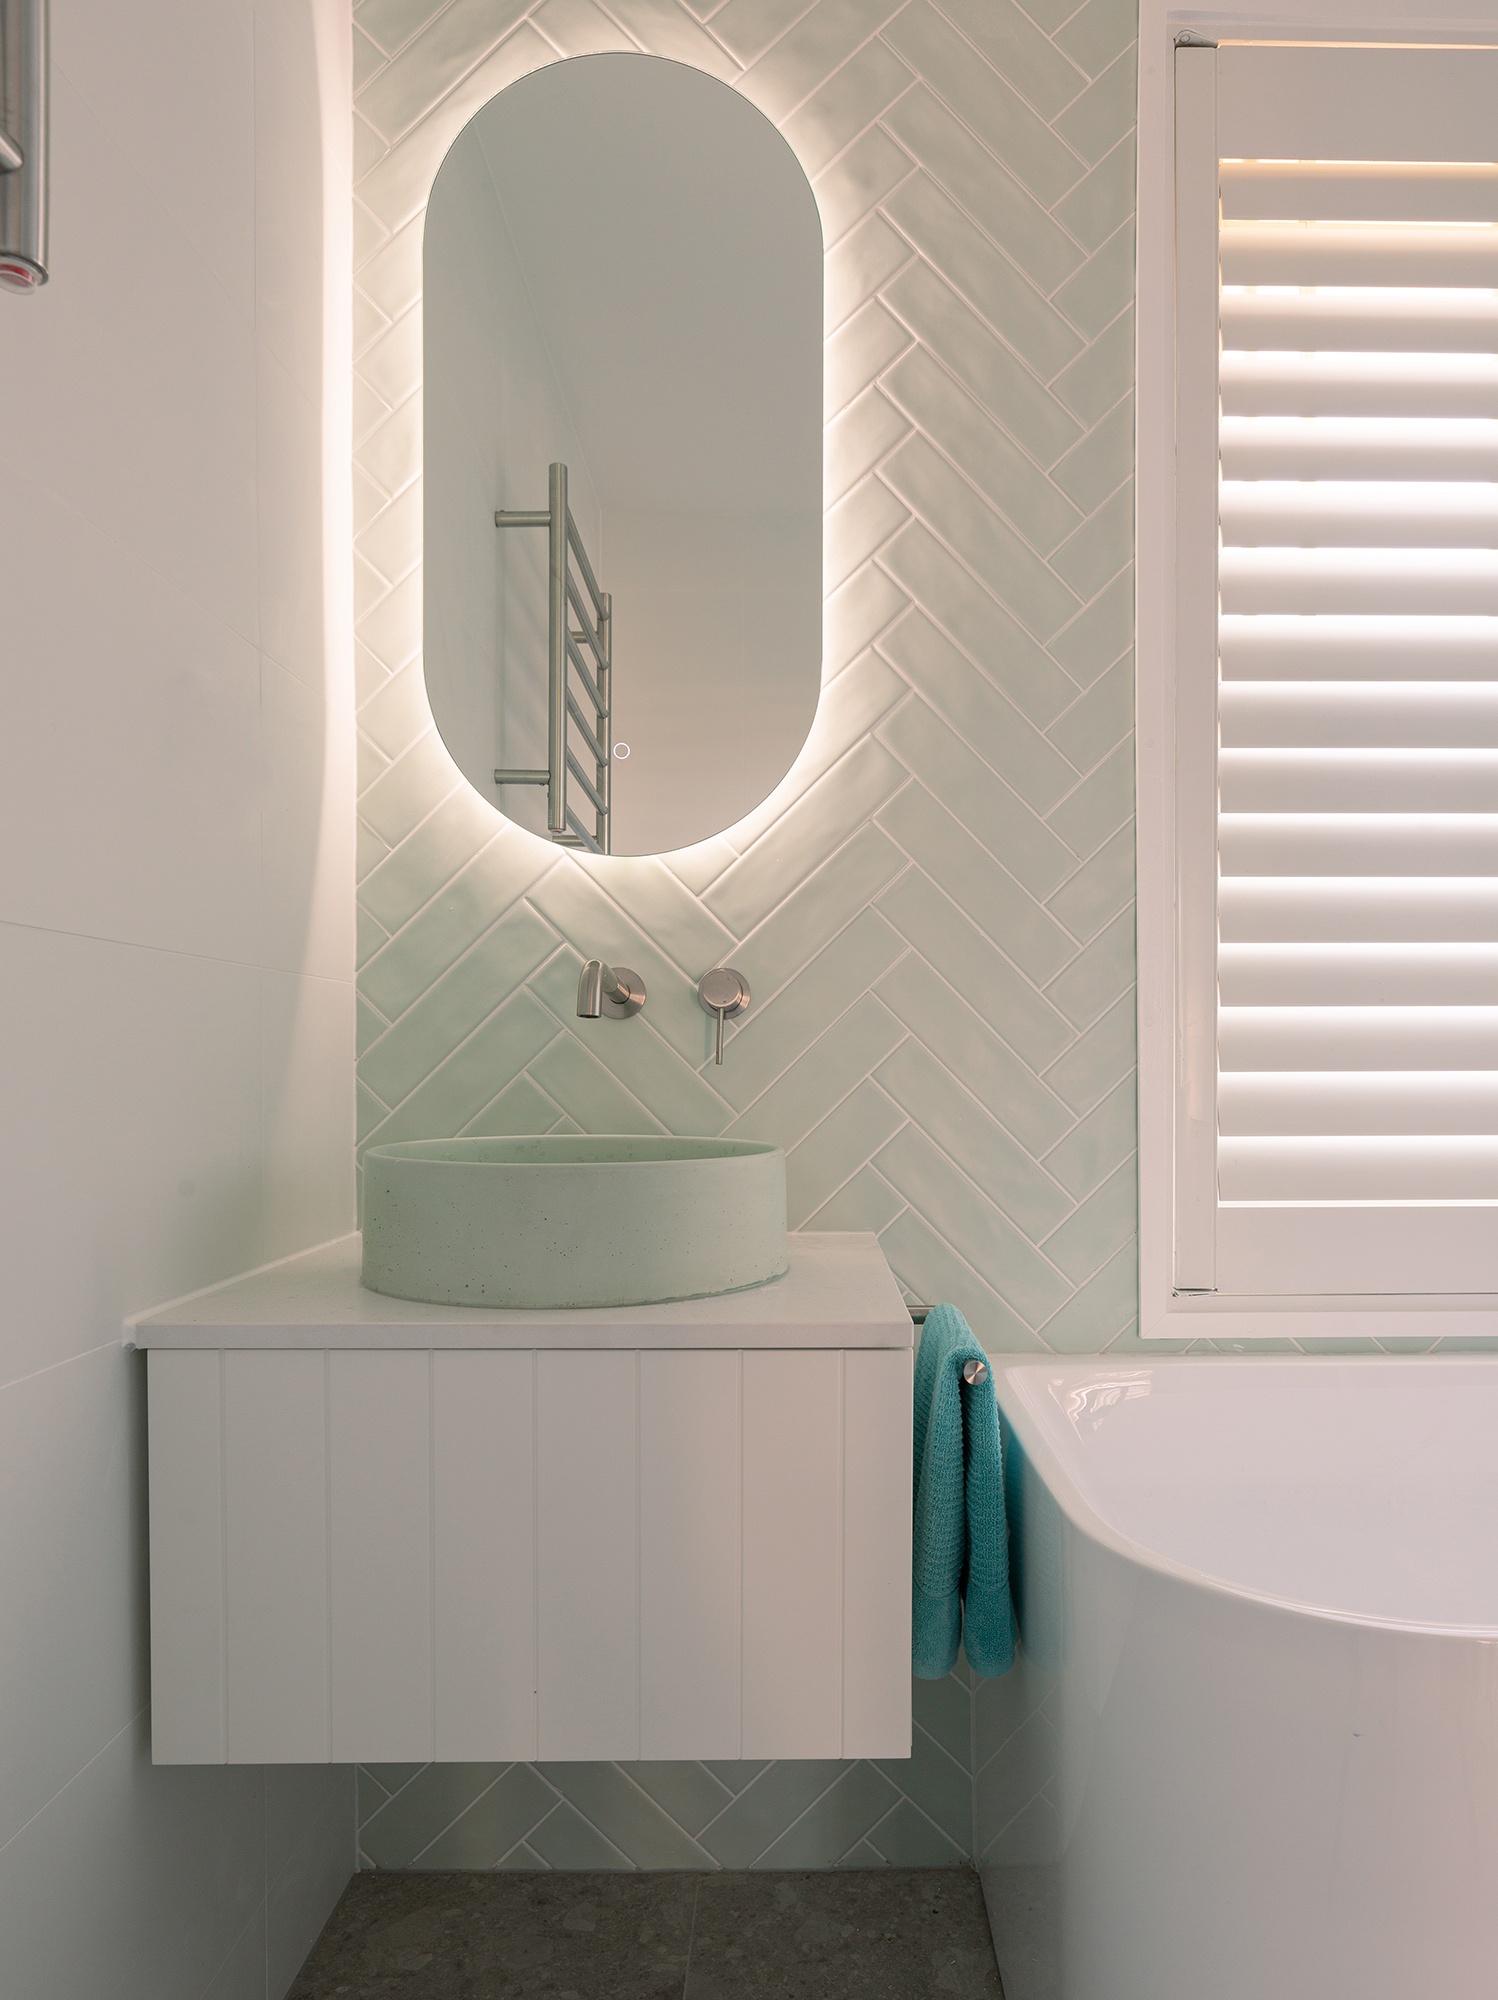 How to Choose the Right Color Scheme for Your Bathroom Renovation